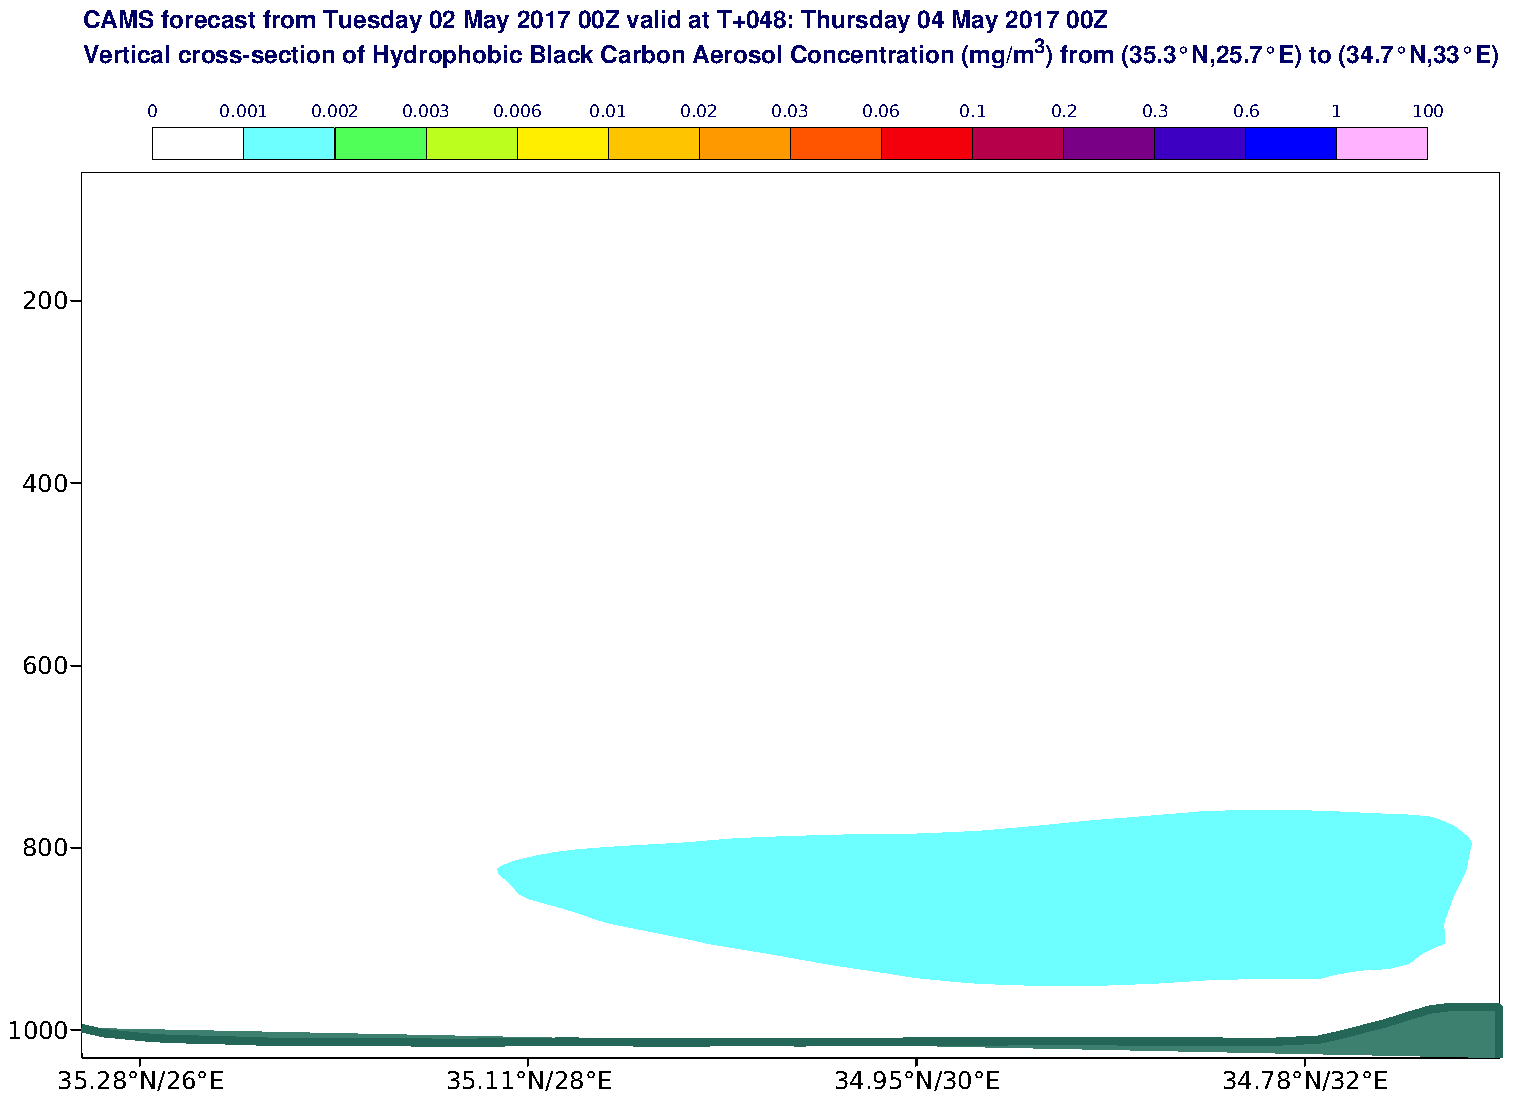 Vertical cross-section of Hydrophobic Black Carbon Aerosol Concentration (mg/m3) valid at T48 - 2017-05-04 00:00